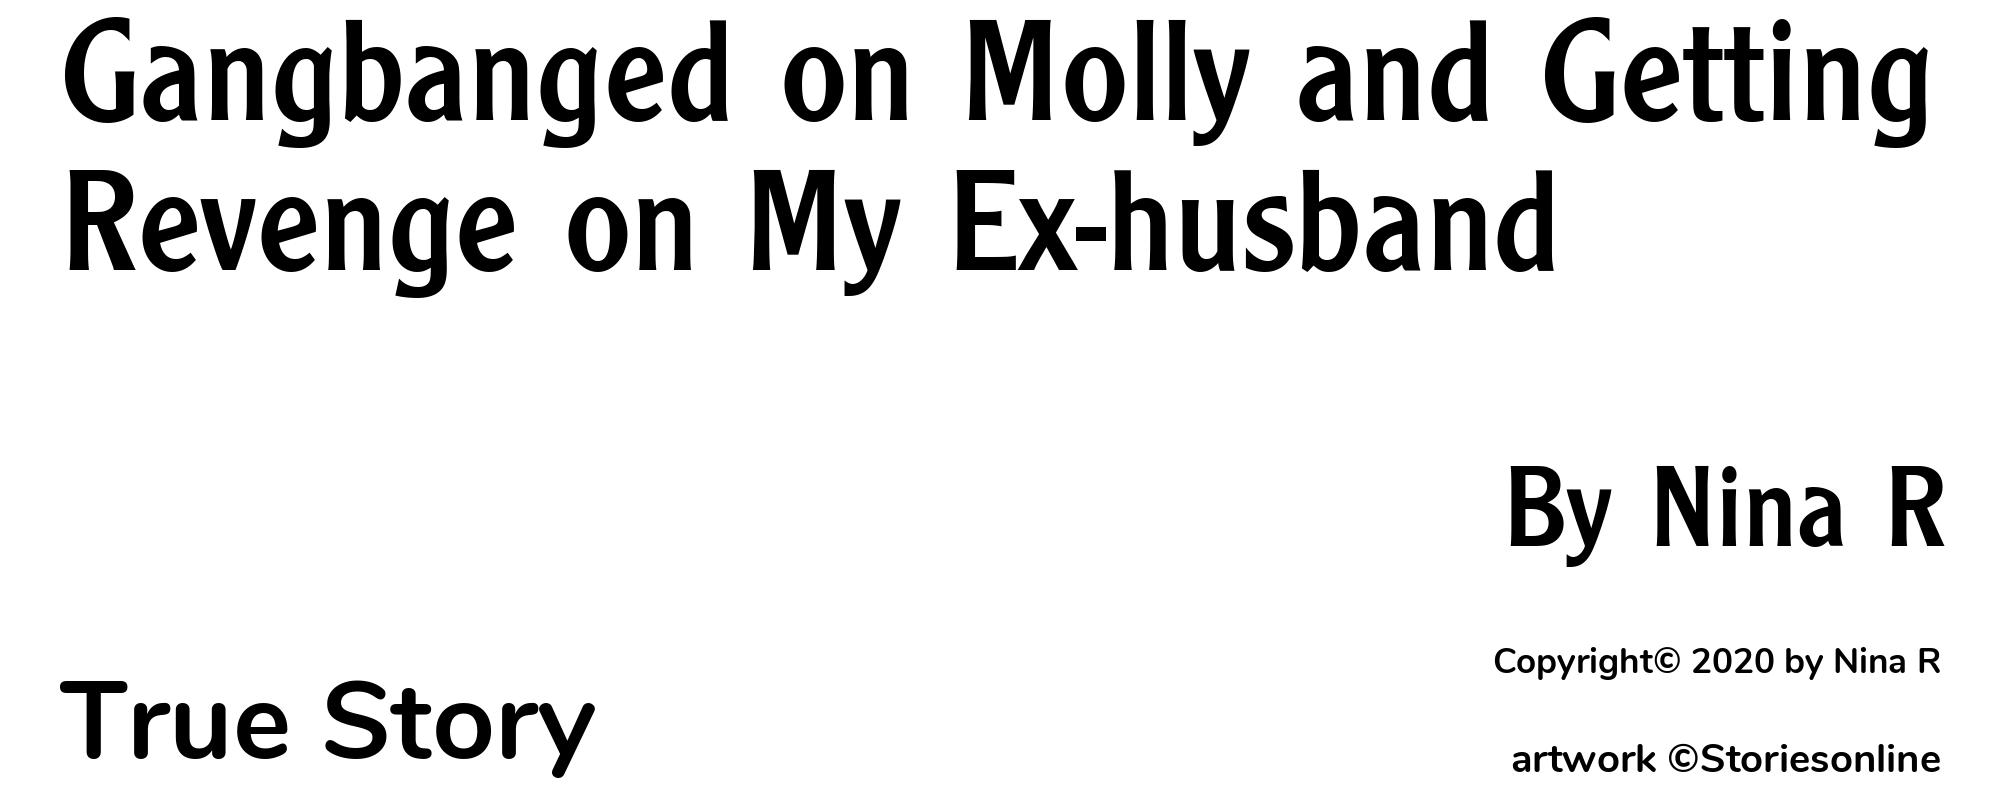 Gangbanged on Molly and Getting Revenge on My Ex-husband - Cover